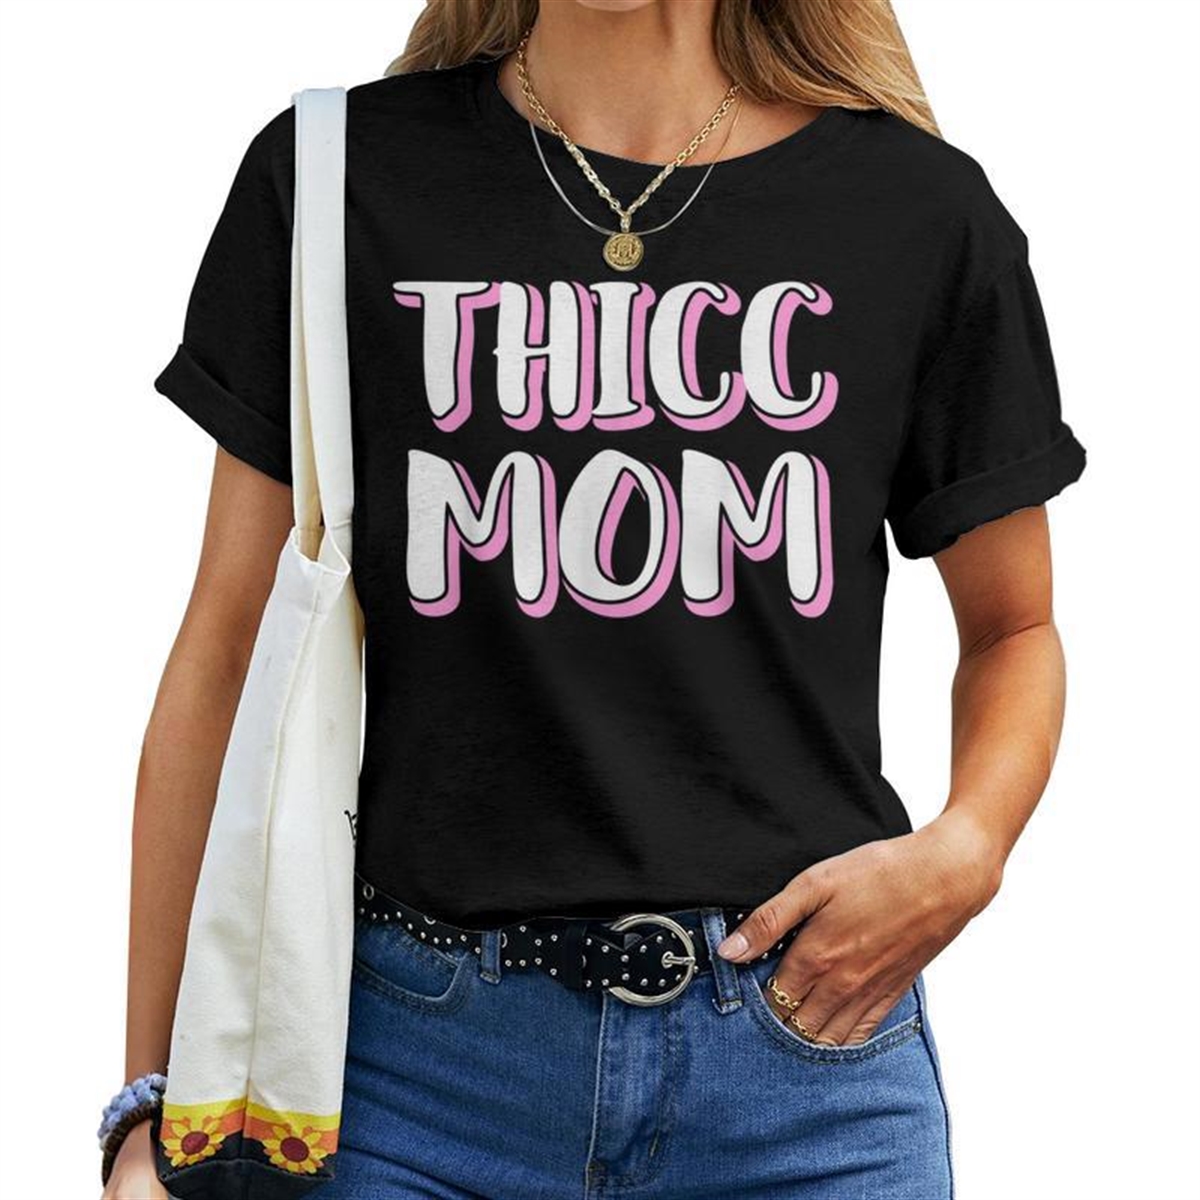 Thicc Mom Body Positivity Mother Women T-shirt